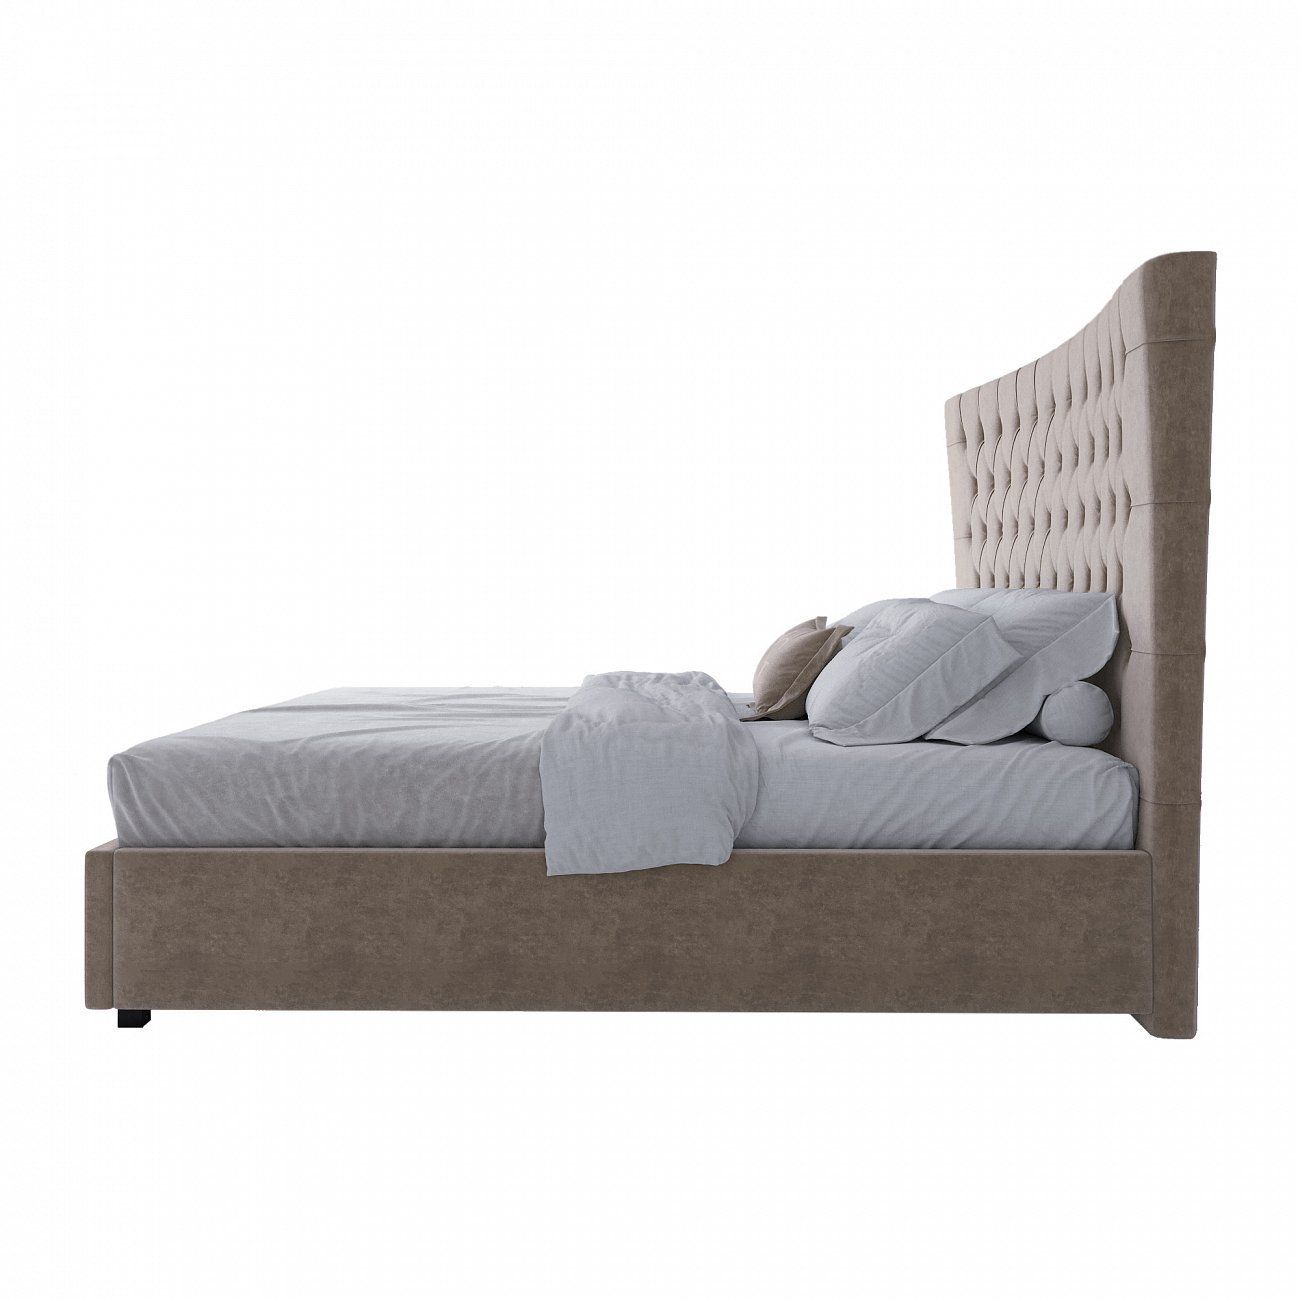 Double bed with upholstered headboard 180x200 cm beige QuickSand